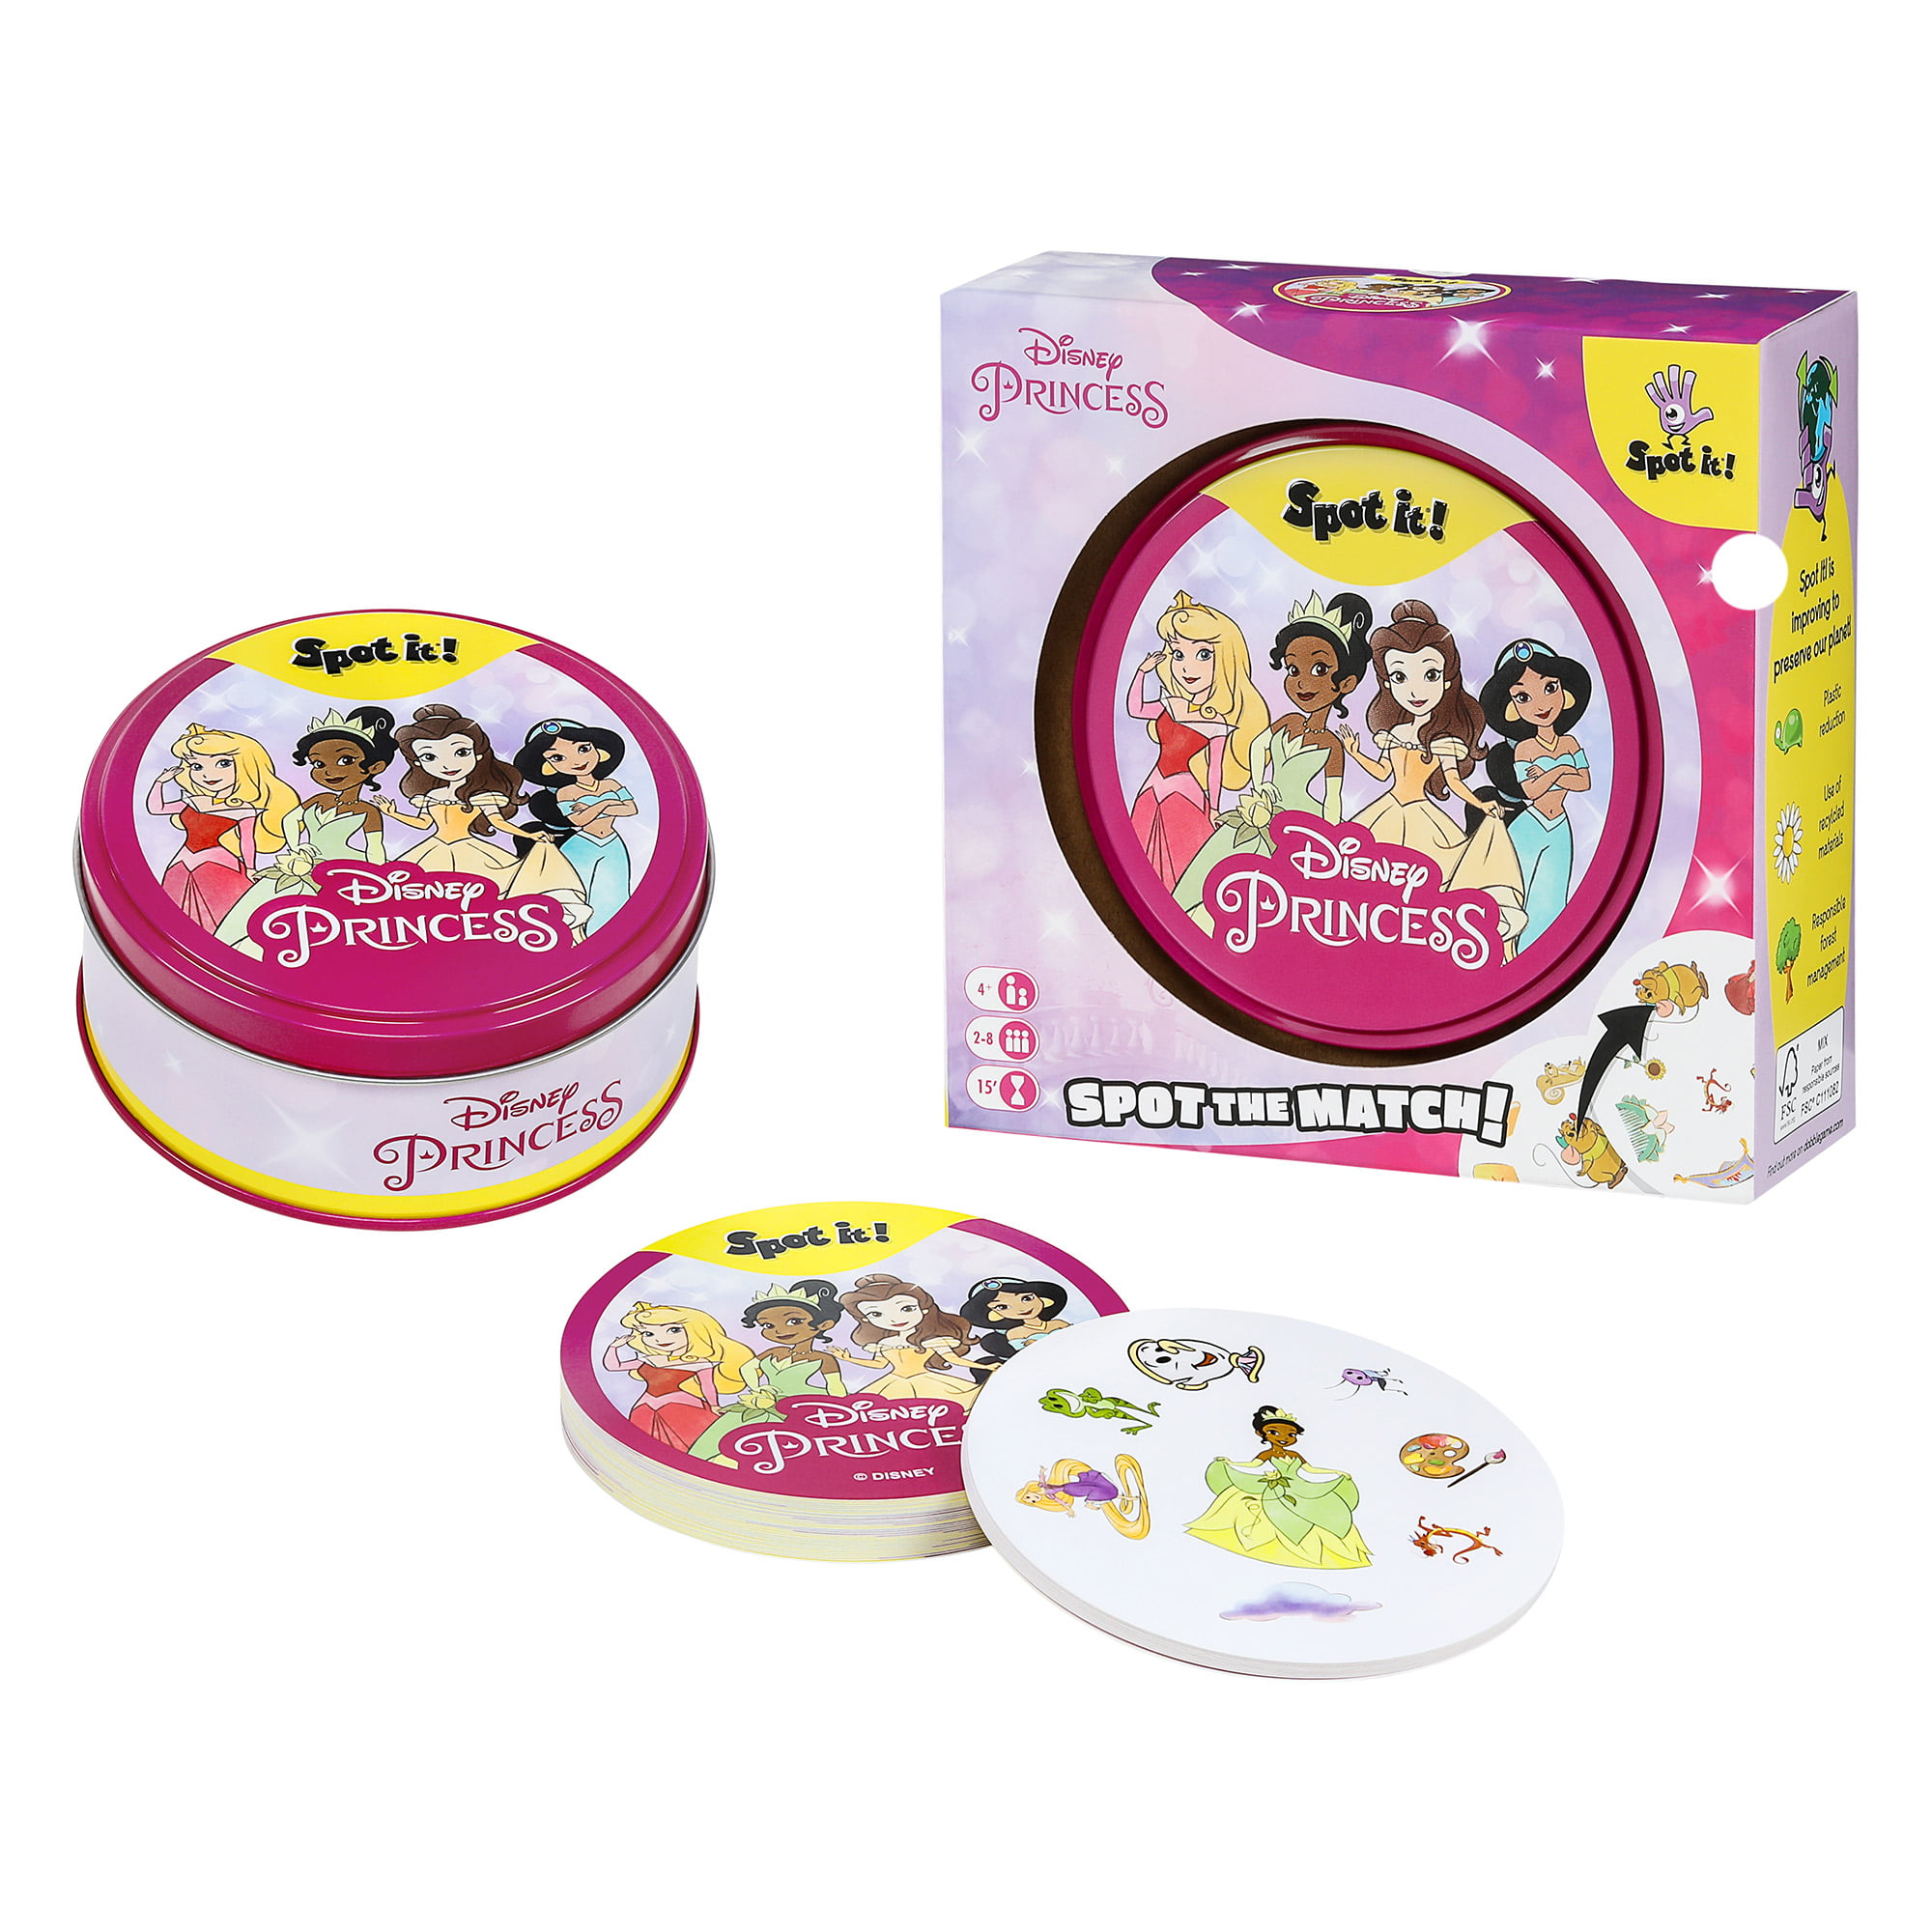  Zygomatic, Dobble Disney Princess 2022 Version, Card Game, Ages 4+, 2-5 Players